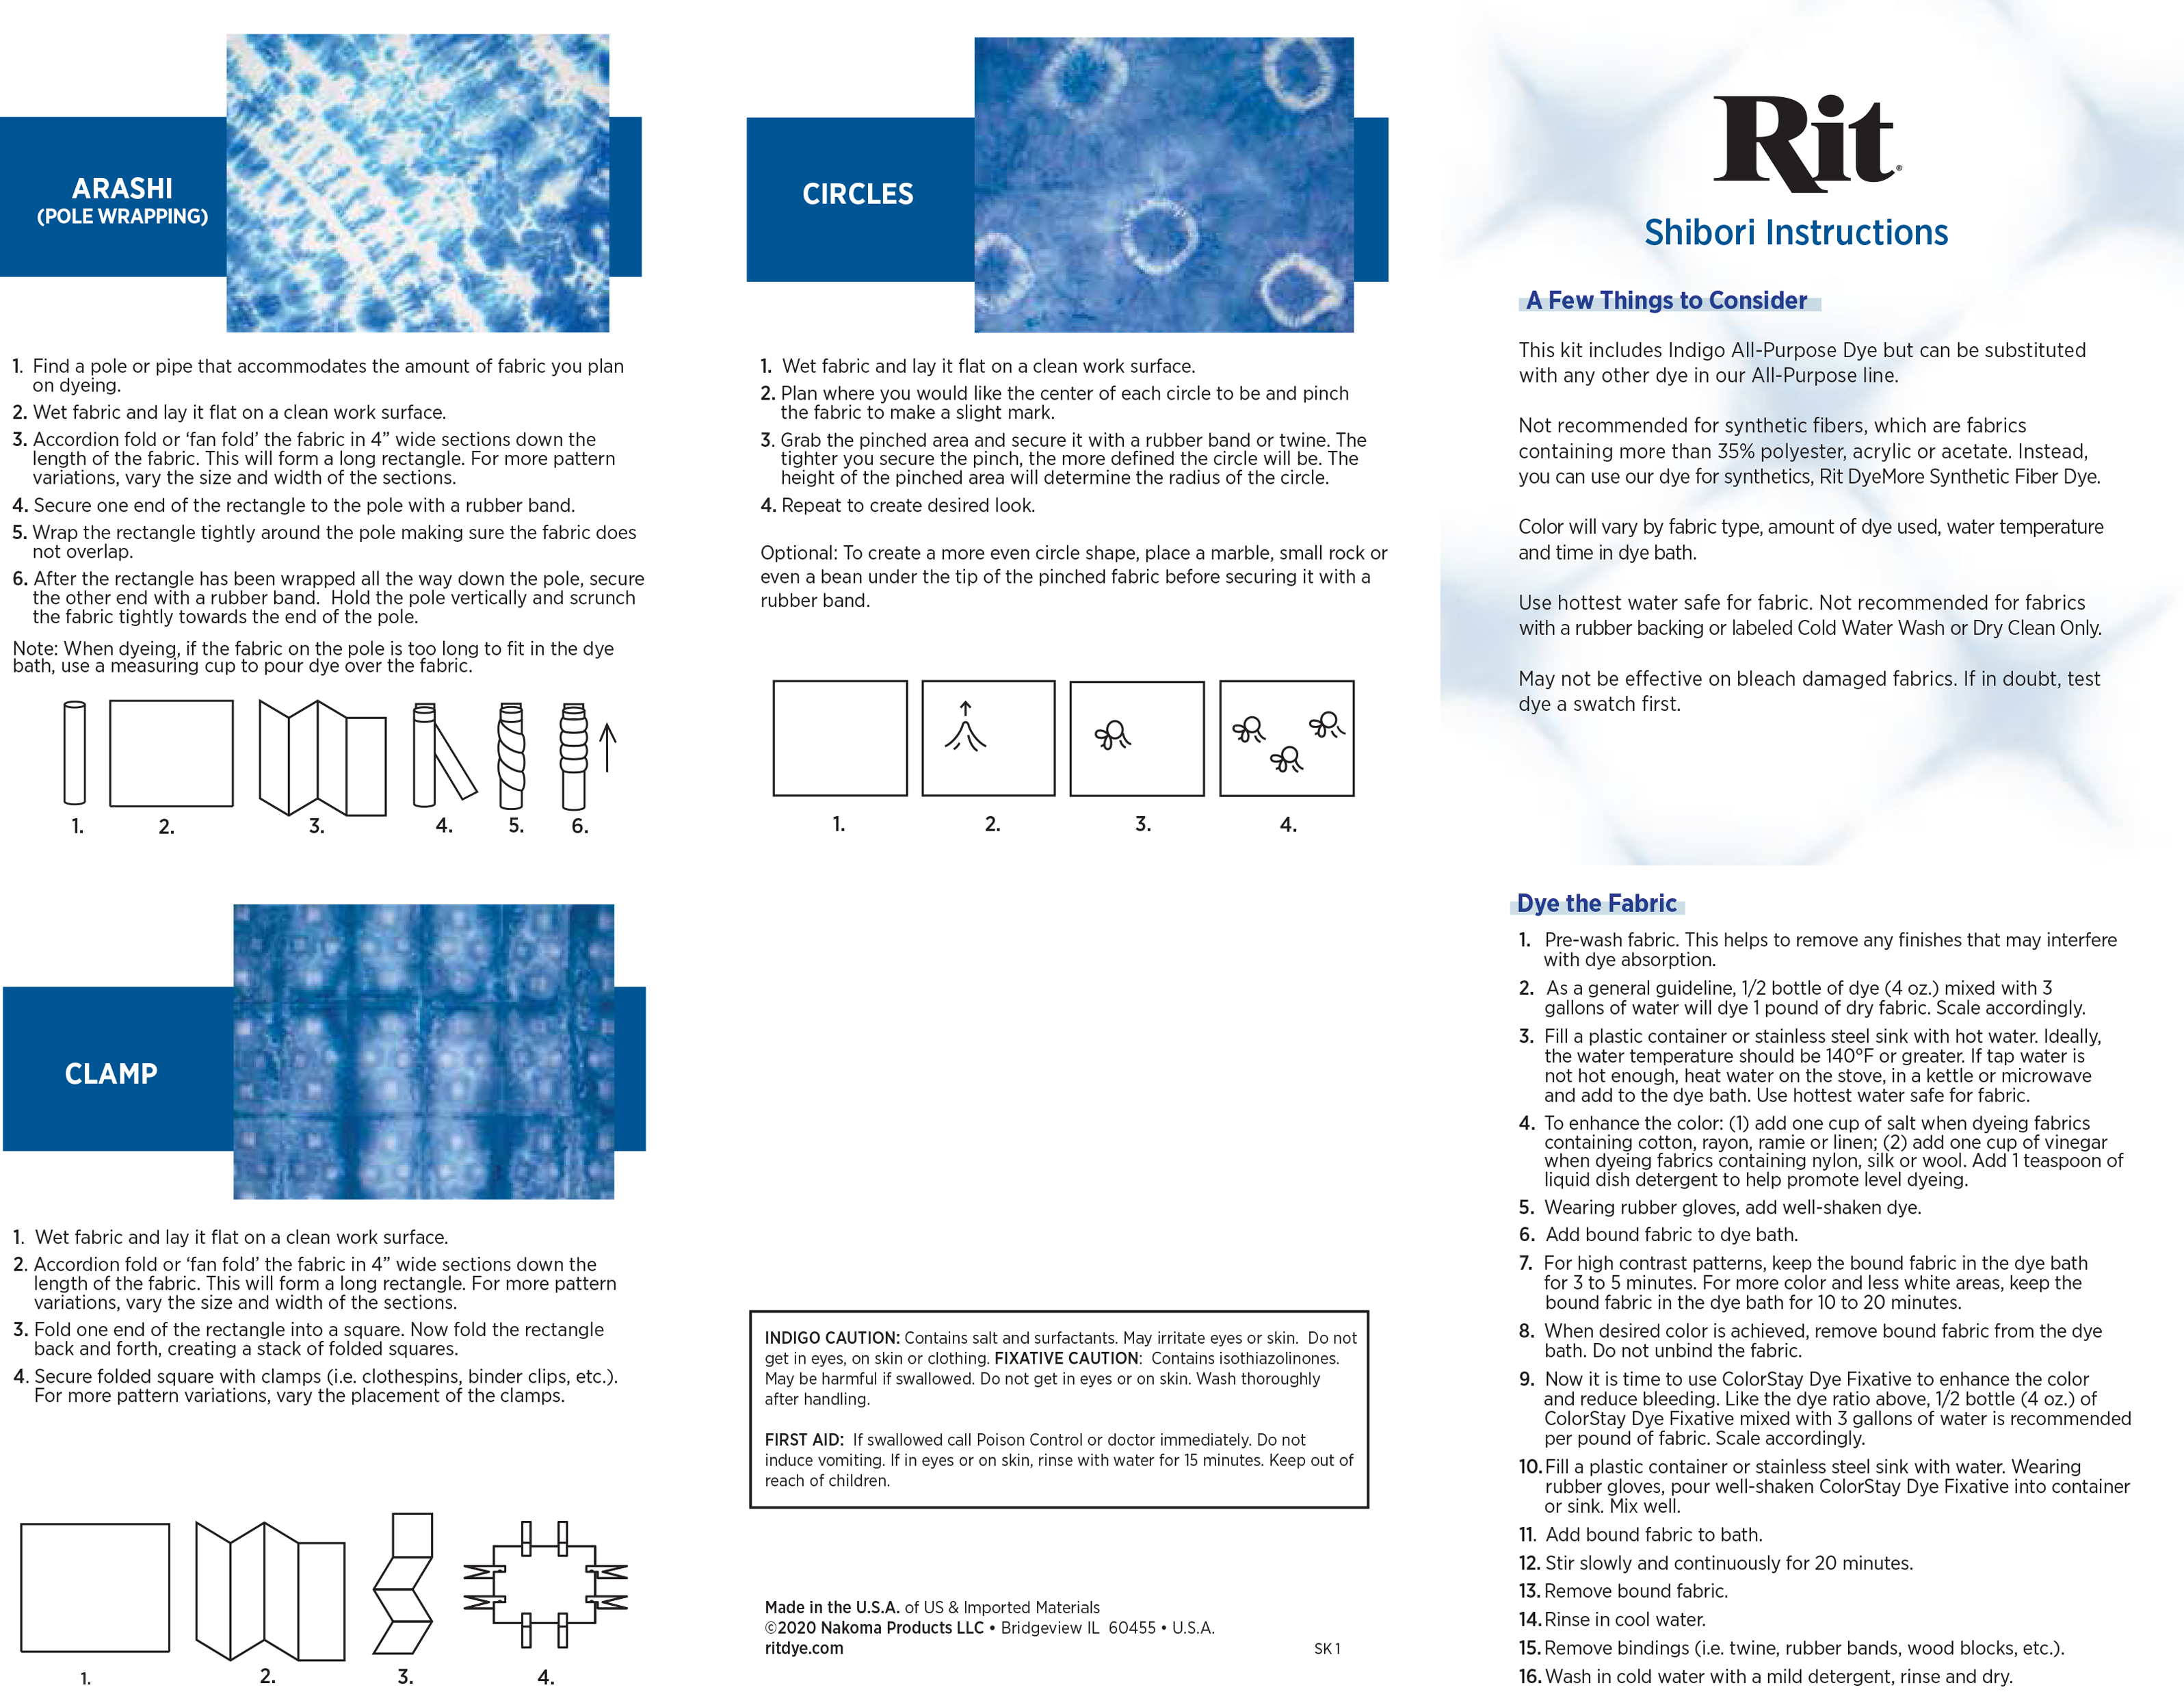 Detailed instruction of how to create various patterns on fabric using Rit Dye